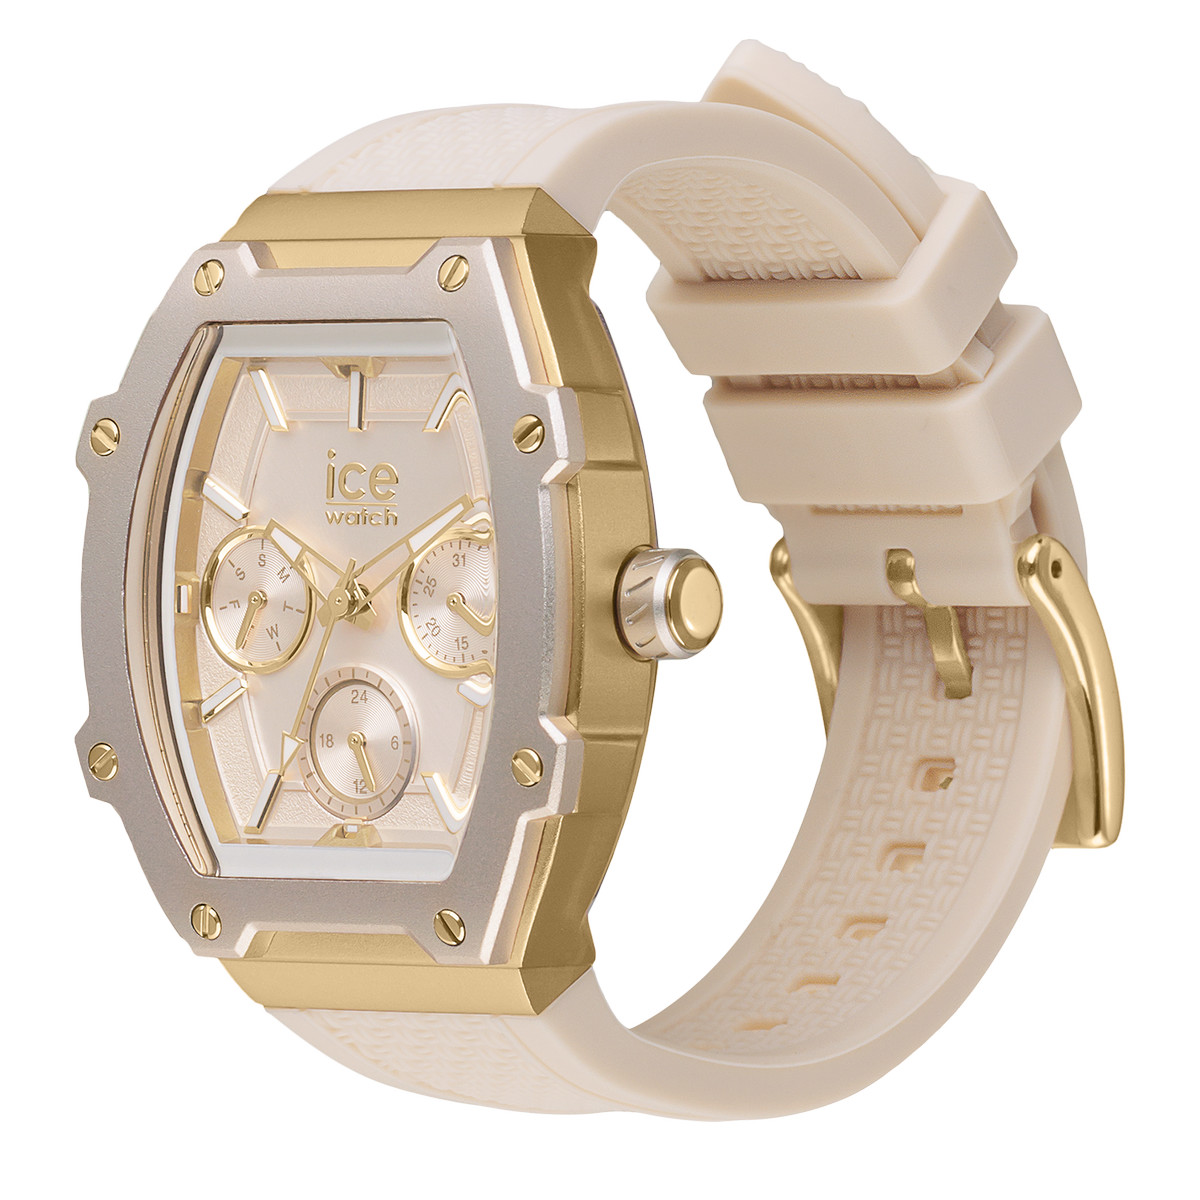 Montre ICE WATCH Ice boliday femme bracelet silicone beige - vue D1